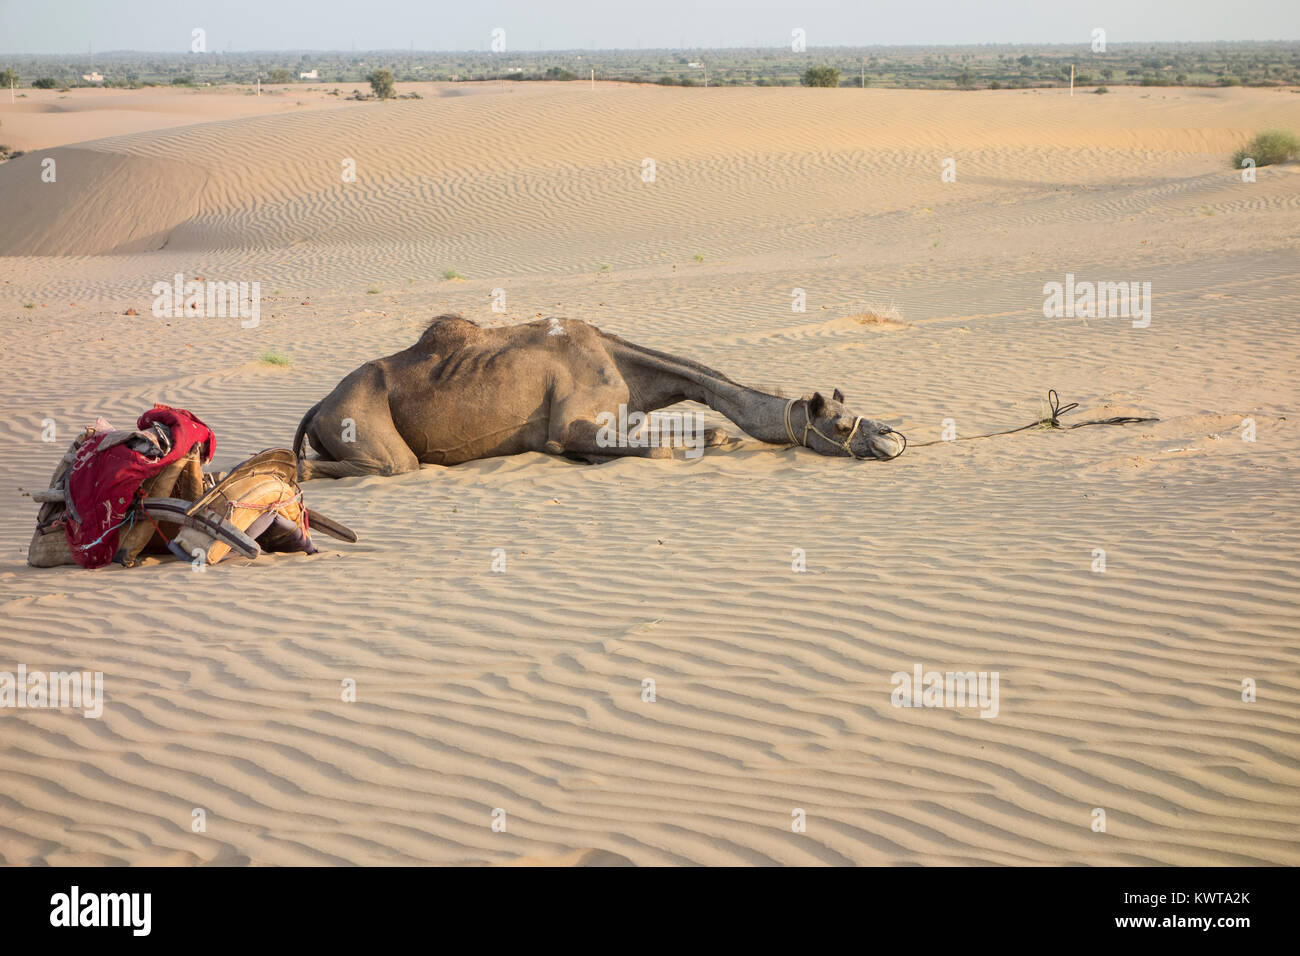 A tired camel rests in the sand next to its saddle. Thar desert, India. Stock Photo